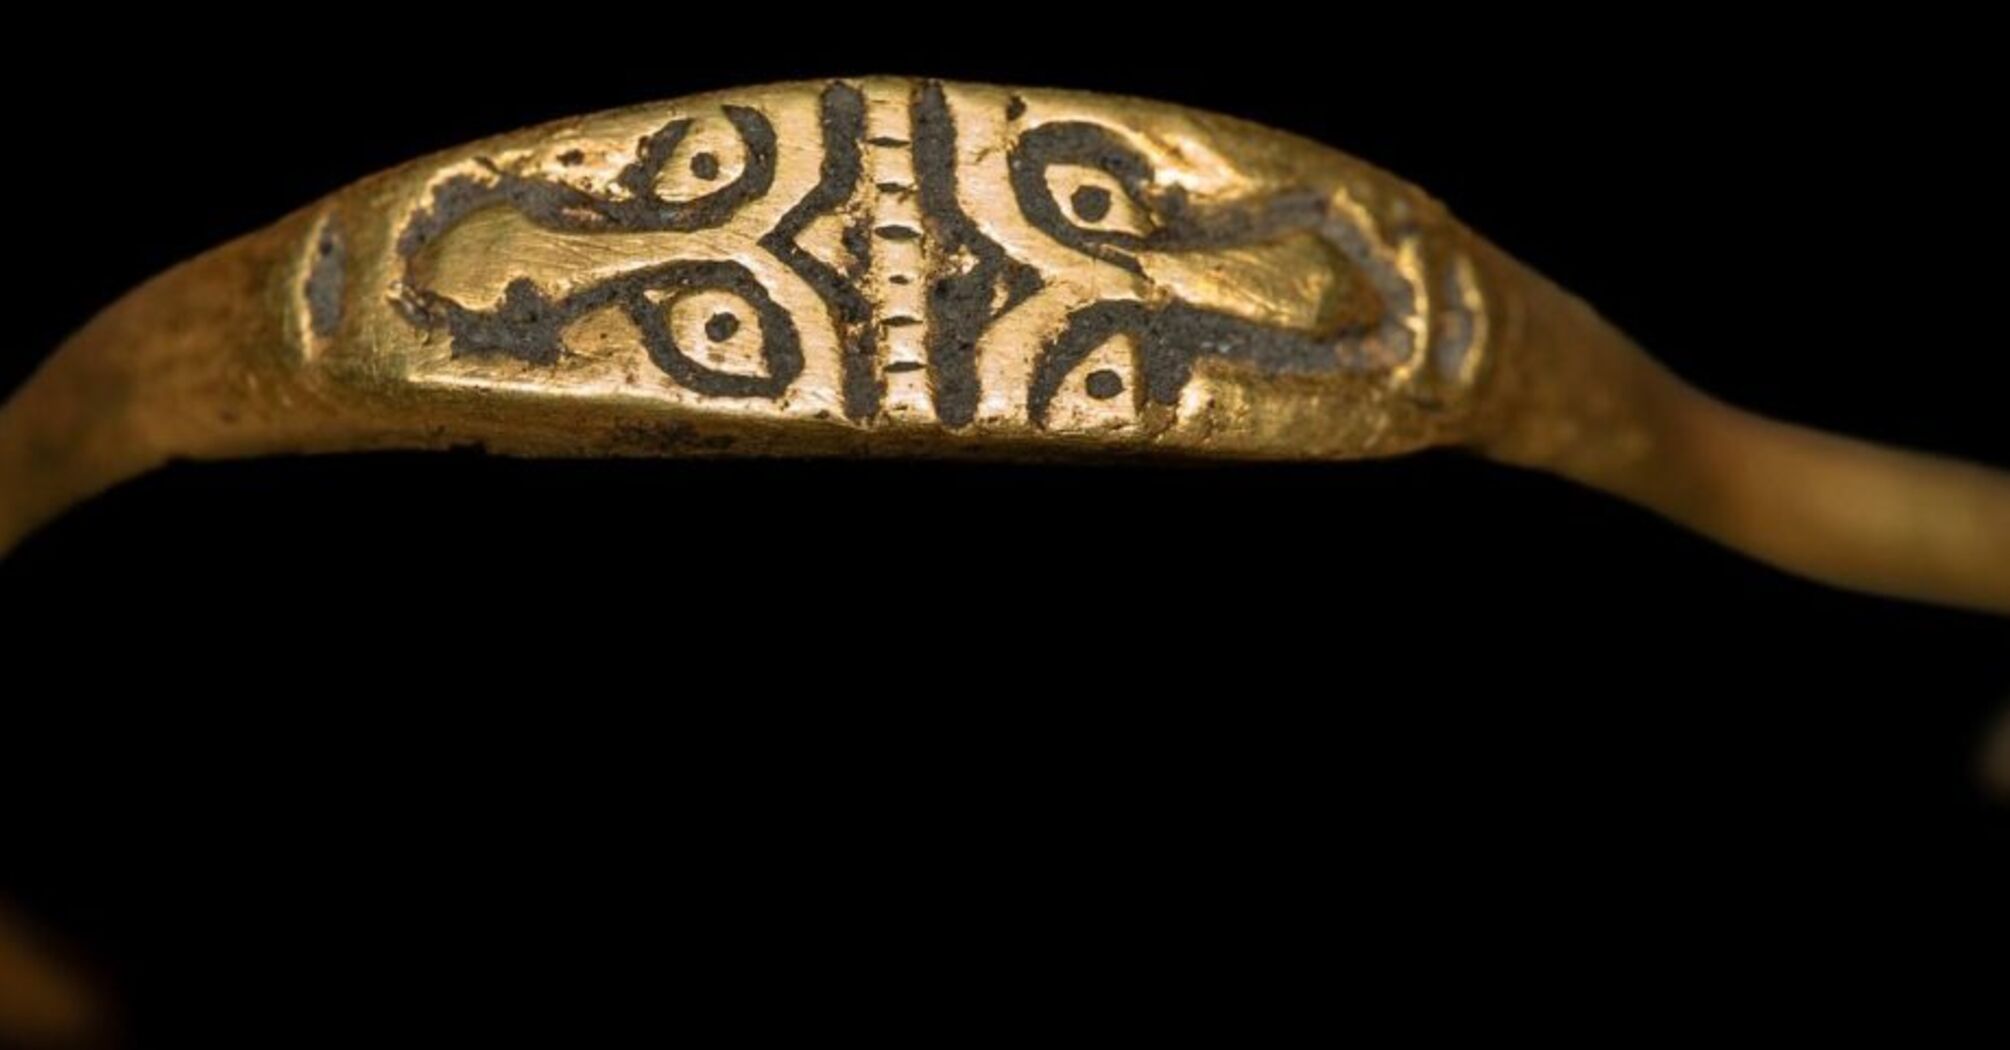 Unique two-faced gold ring found in Poland (photo)